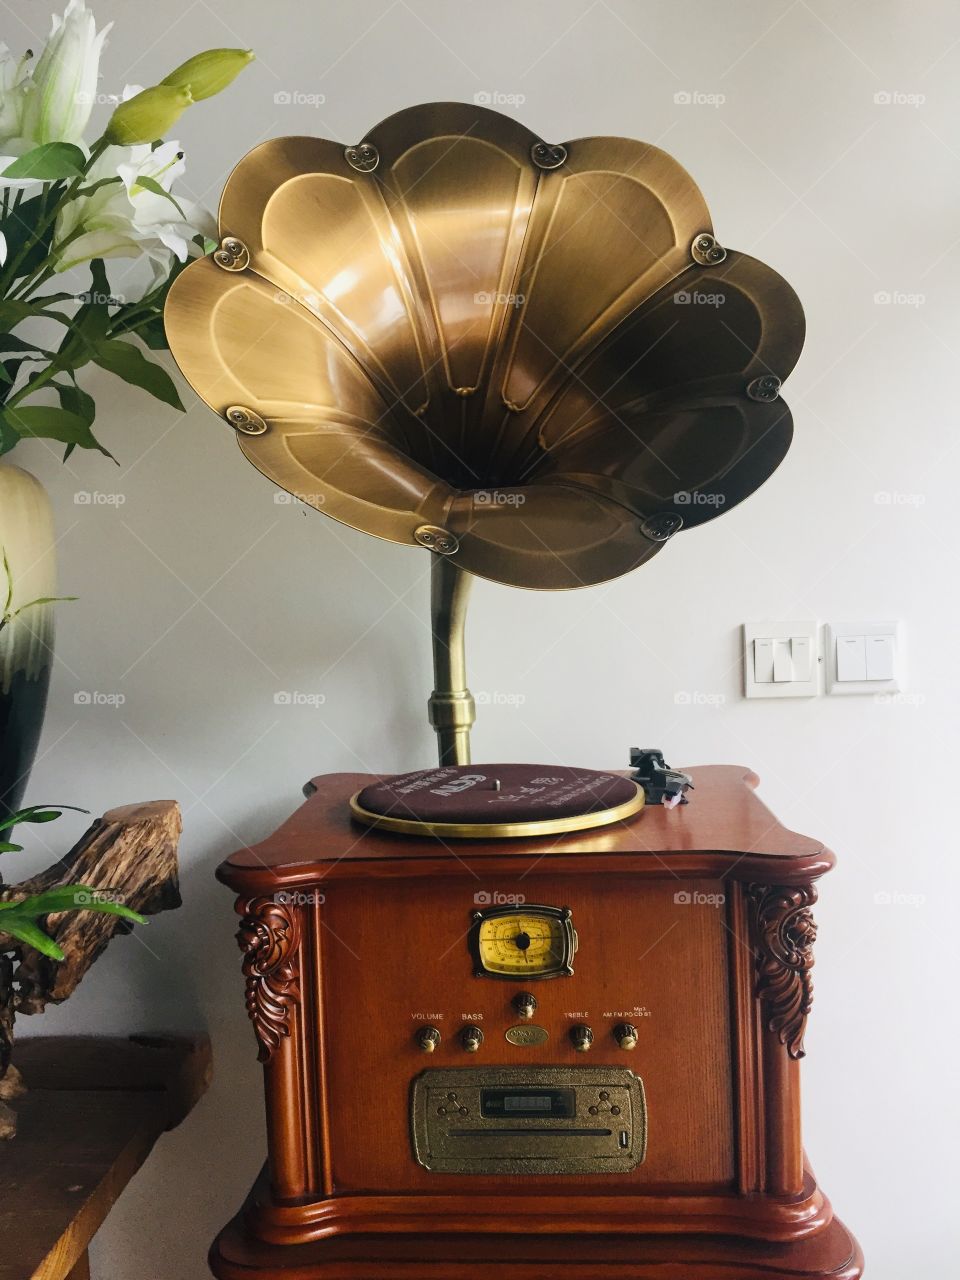 Flower gramophone! Yes , Old is gold !